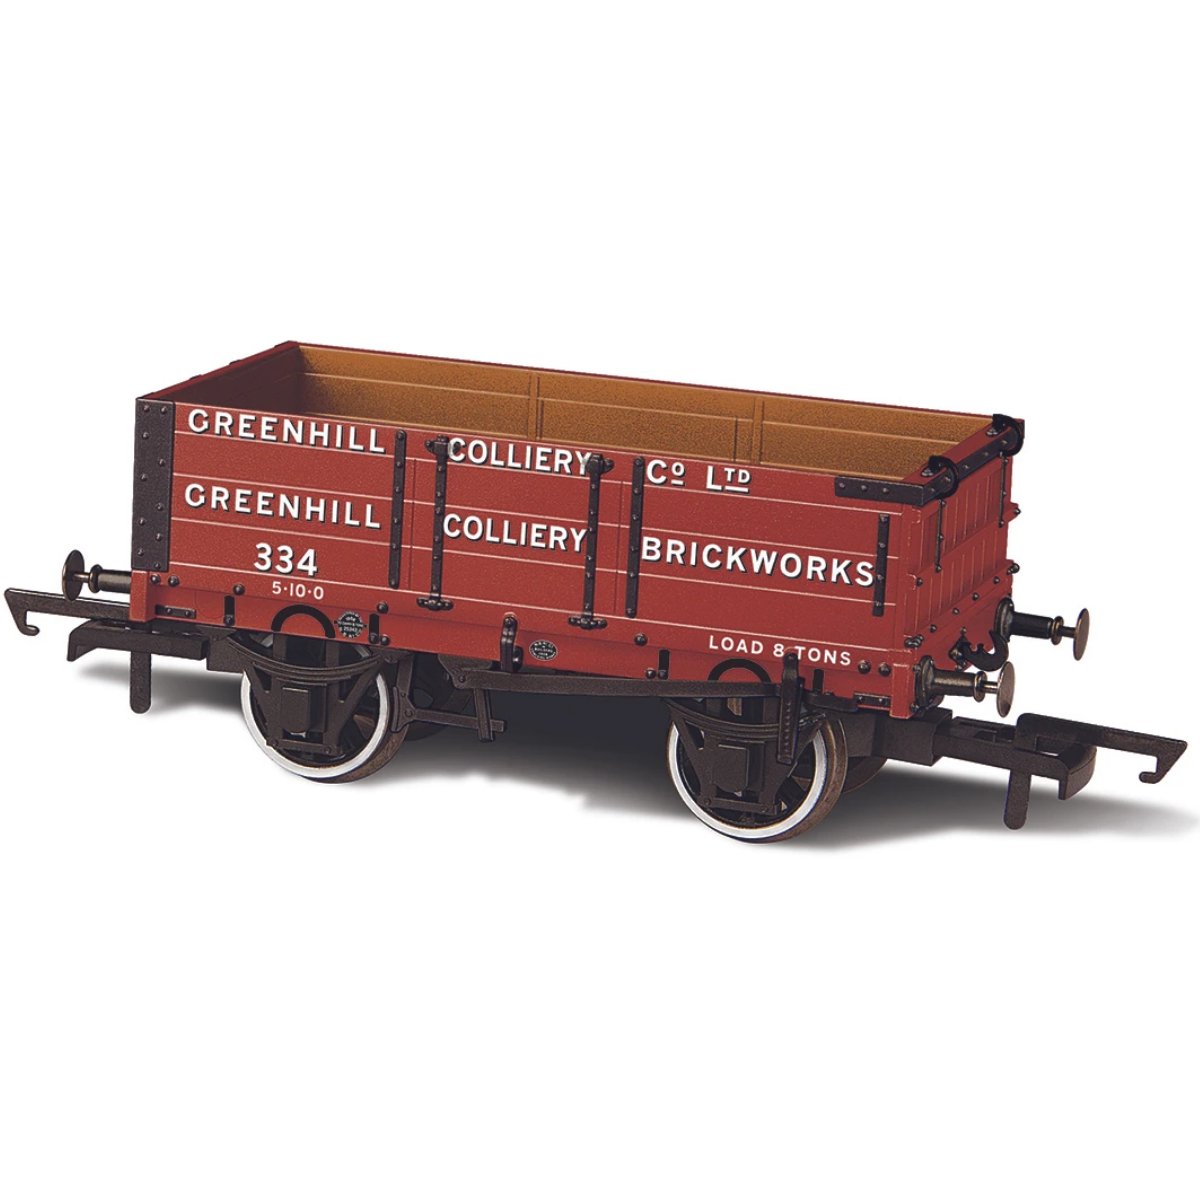 Oxford Rail 4 Plank Mineral Wagon Greenhill Colliery No 334 - Phillips Hobbies